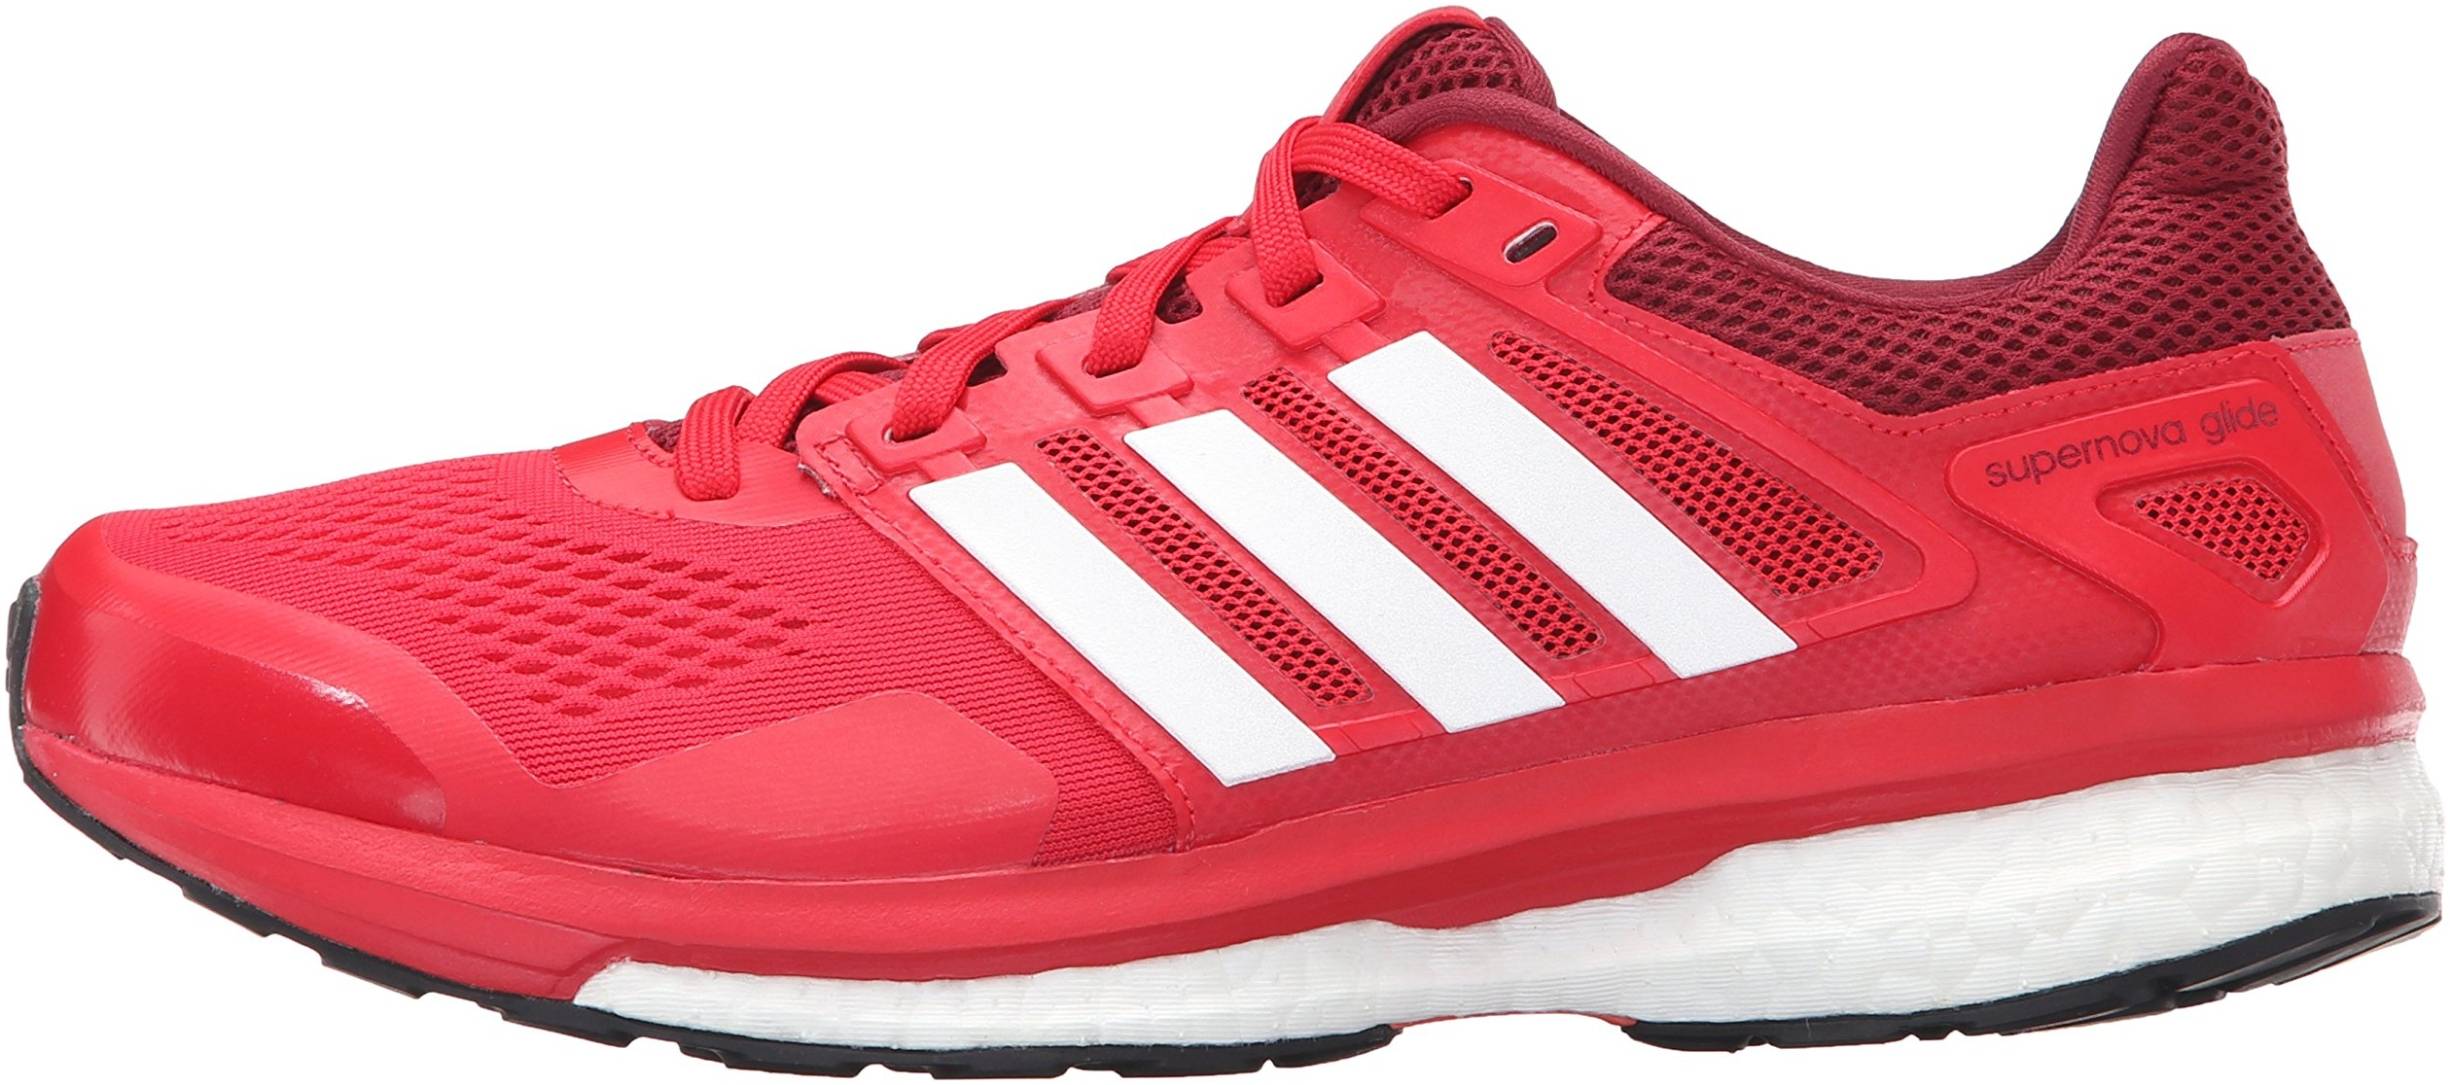 Only £101 + Review of Adidas Supernova Glide Boost 8 | RunRepeat